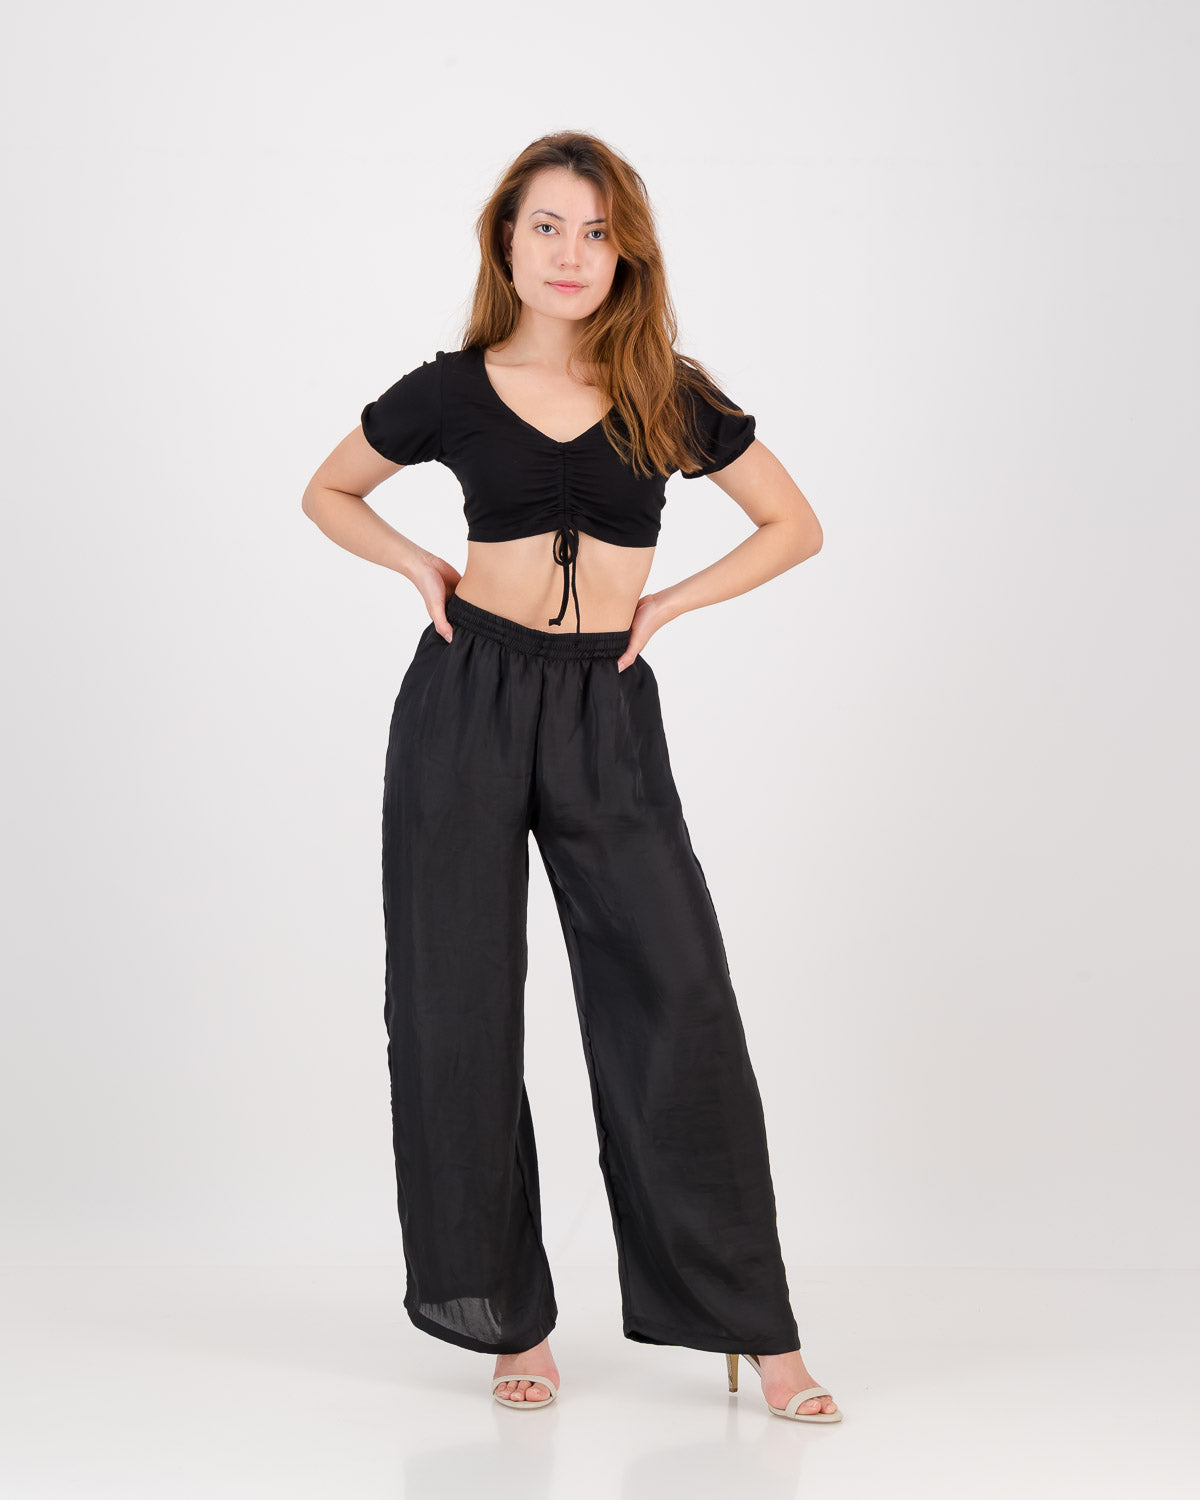 Trousers- Satin